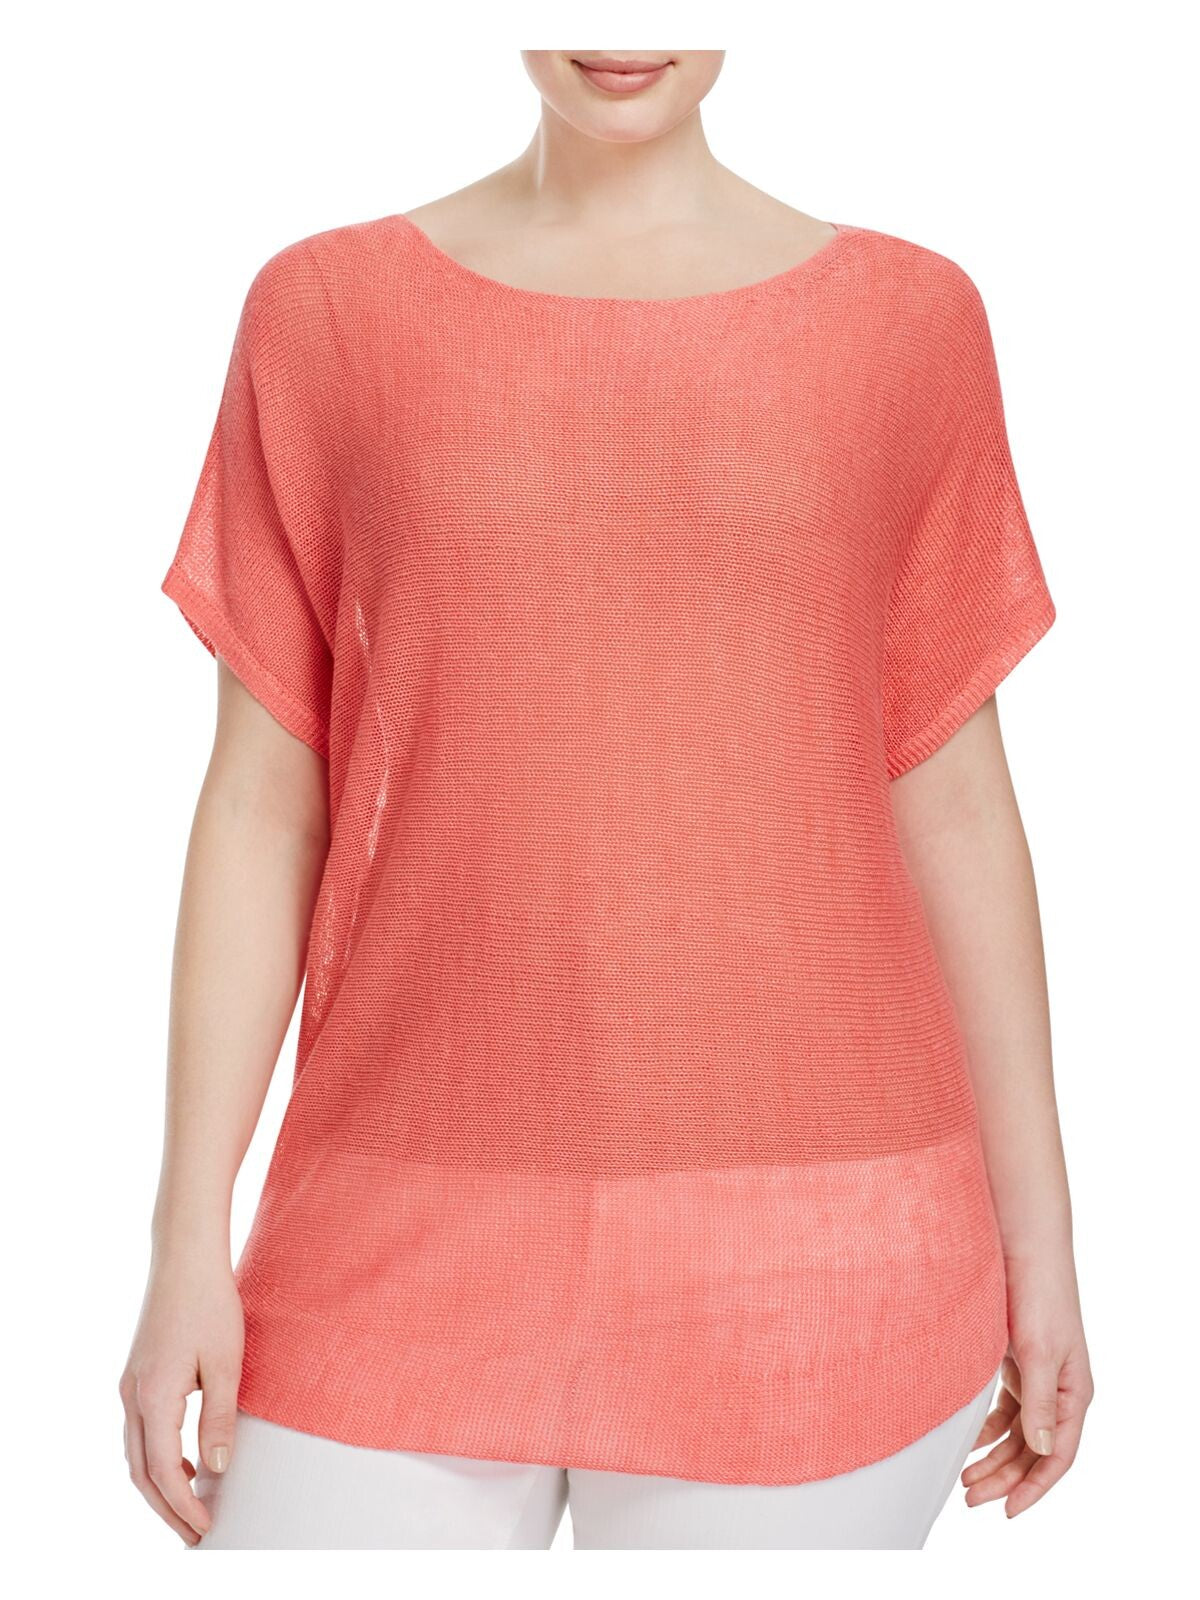 EILEEN FISHER Womens Coral Knit Ribbed Short Sleeve Boat Neck Top Plus 1X